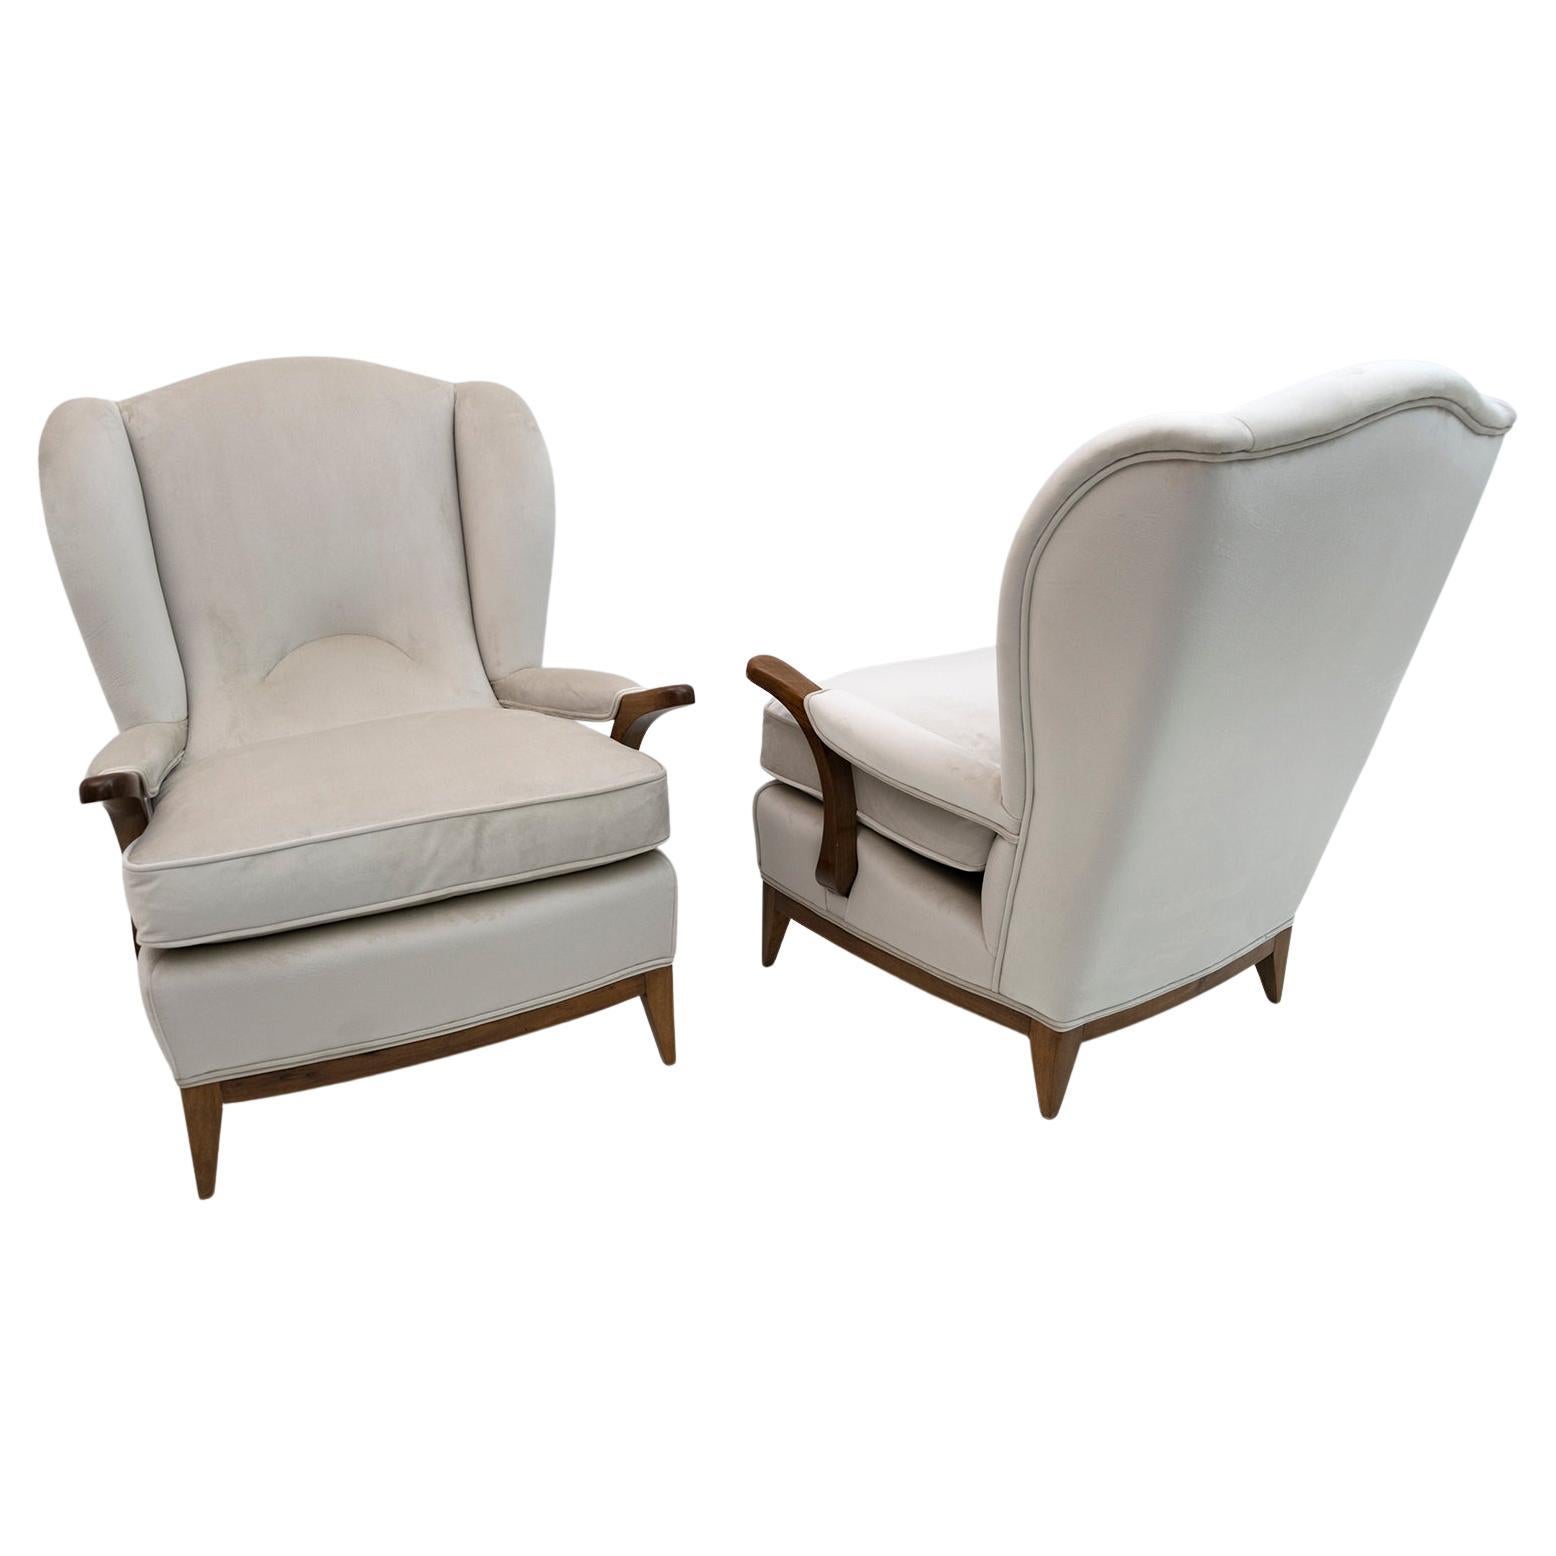 Rare pair of wingback armchairs attributed to Paolo Buffa and produced in the 1950s.
The armchairs have been restored and upholstered with ivory velvet.

Paolo Buffa was an Italian designer and architect. He is one of the most prolific designers